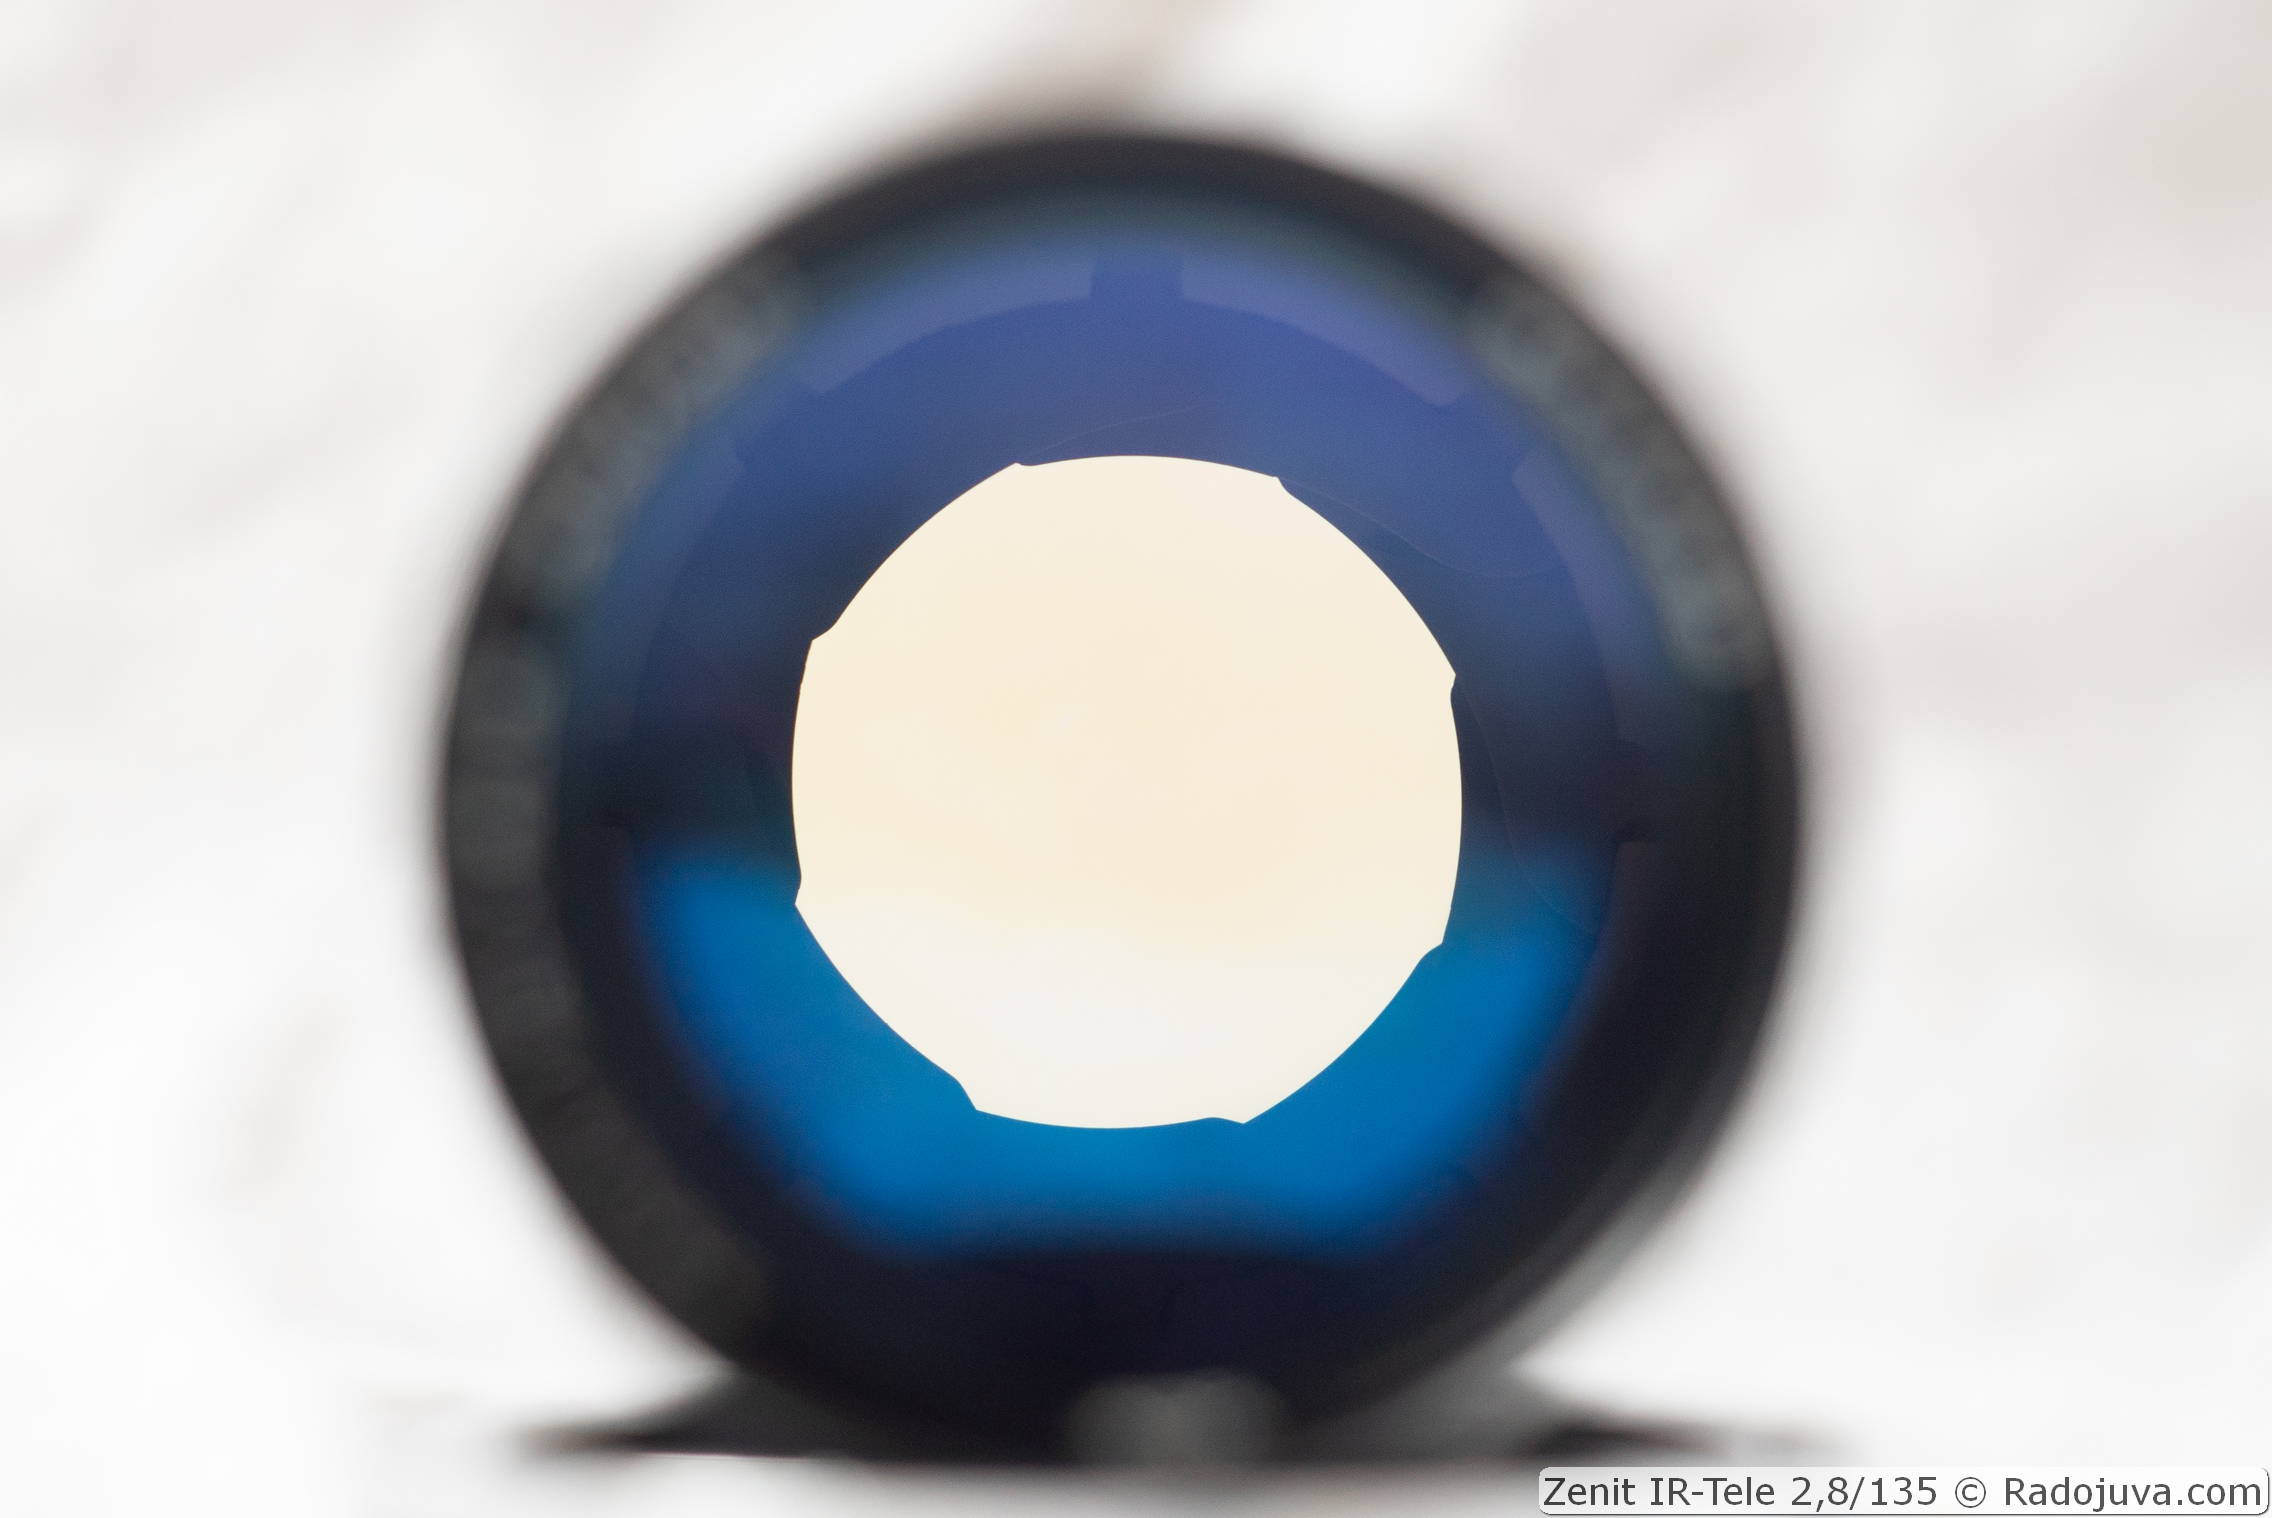 View of the lens pupil at aperture ~F / 4.